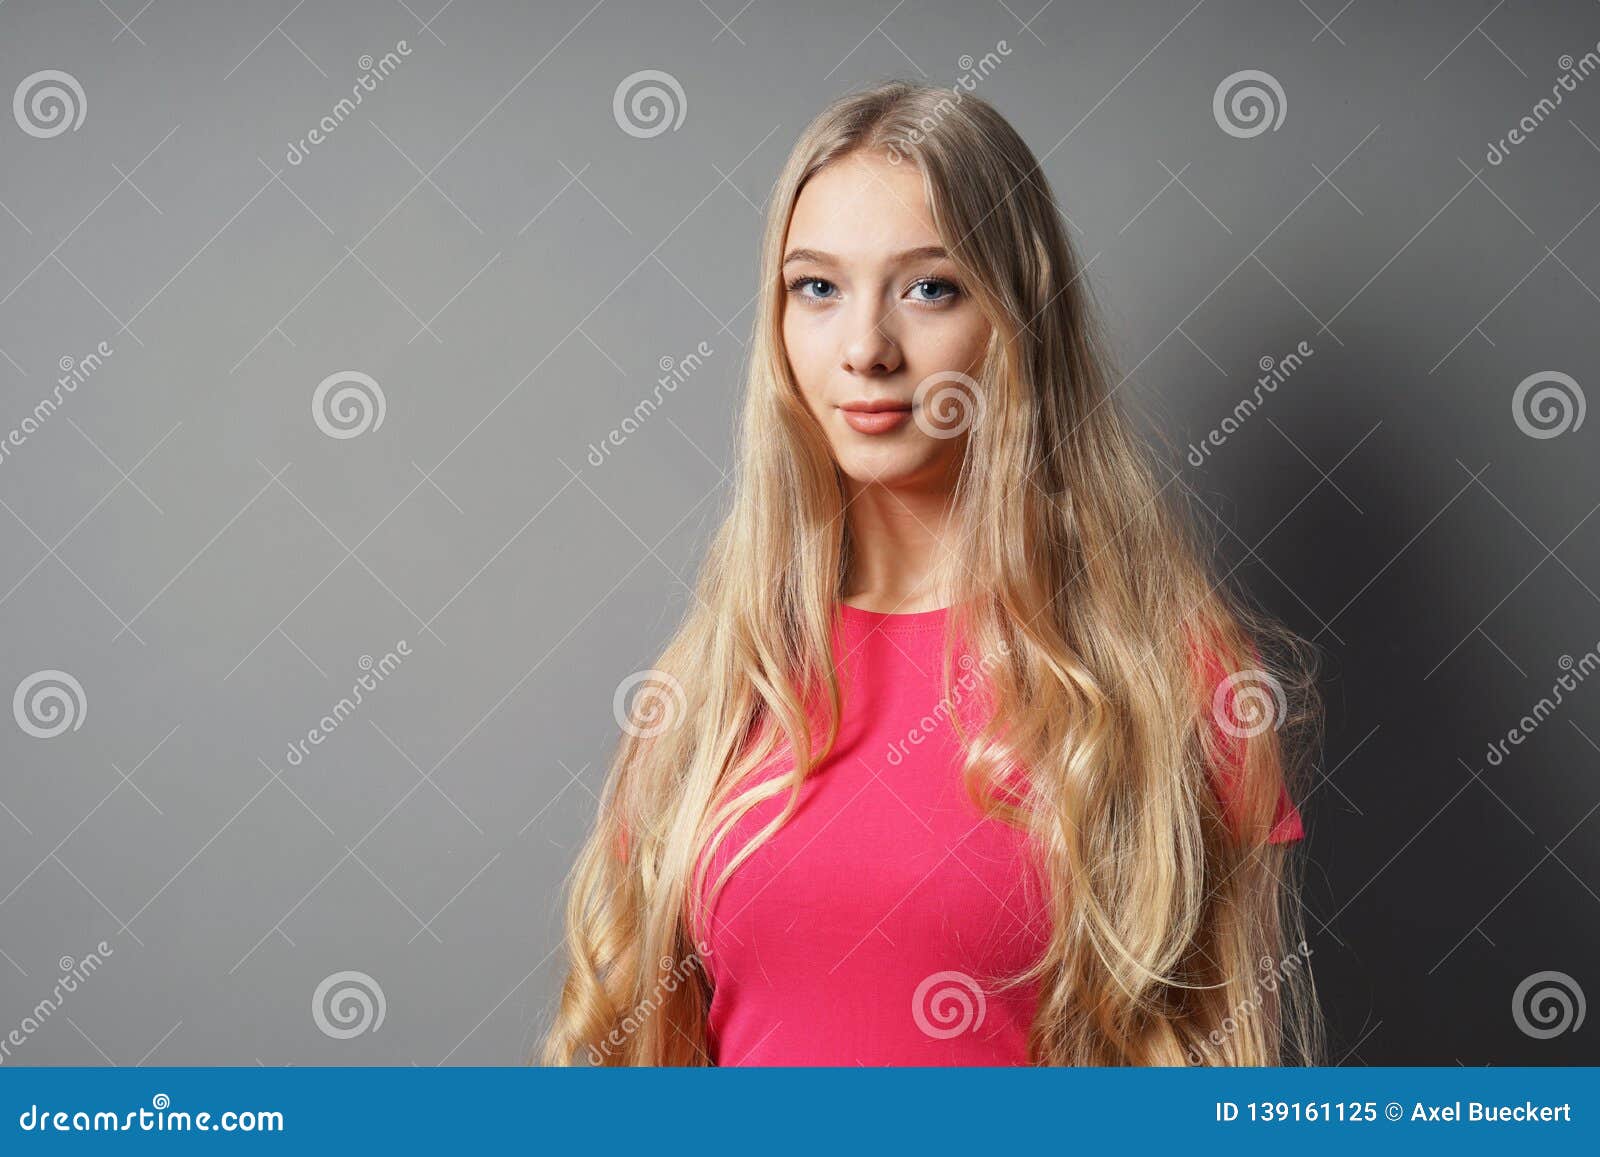 teenage woman with long blond hair and contented smile